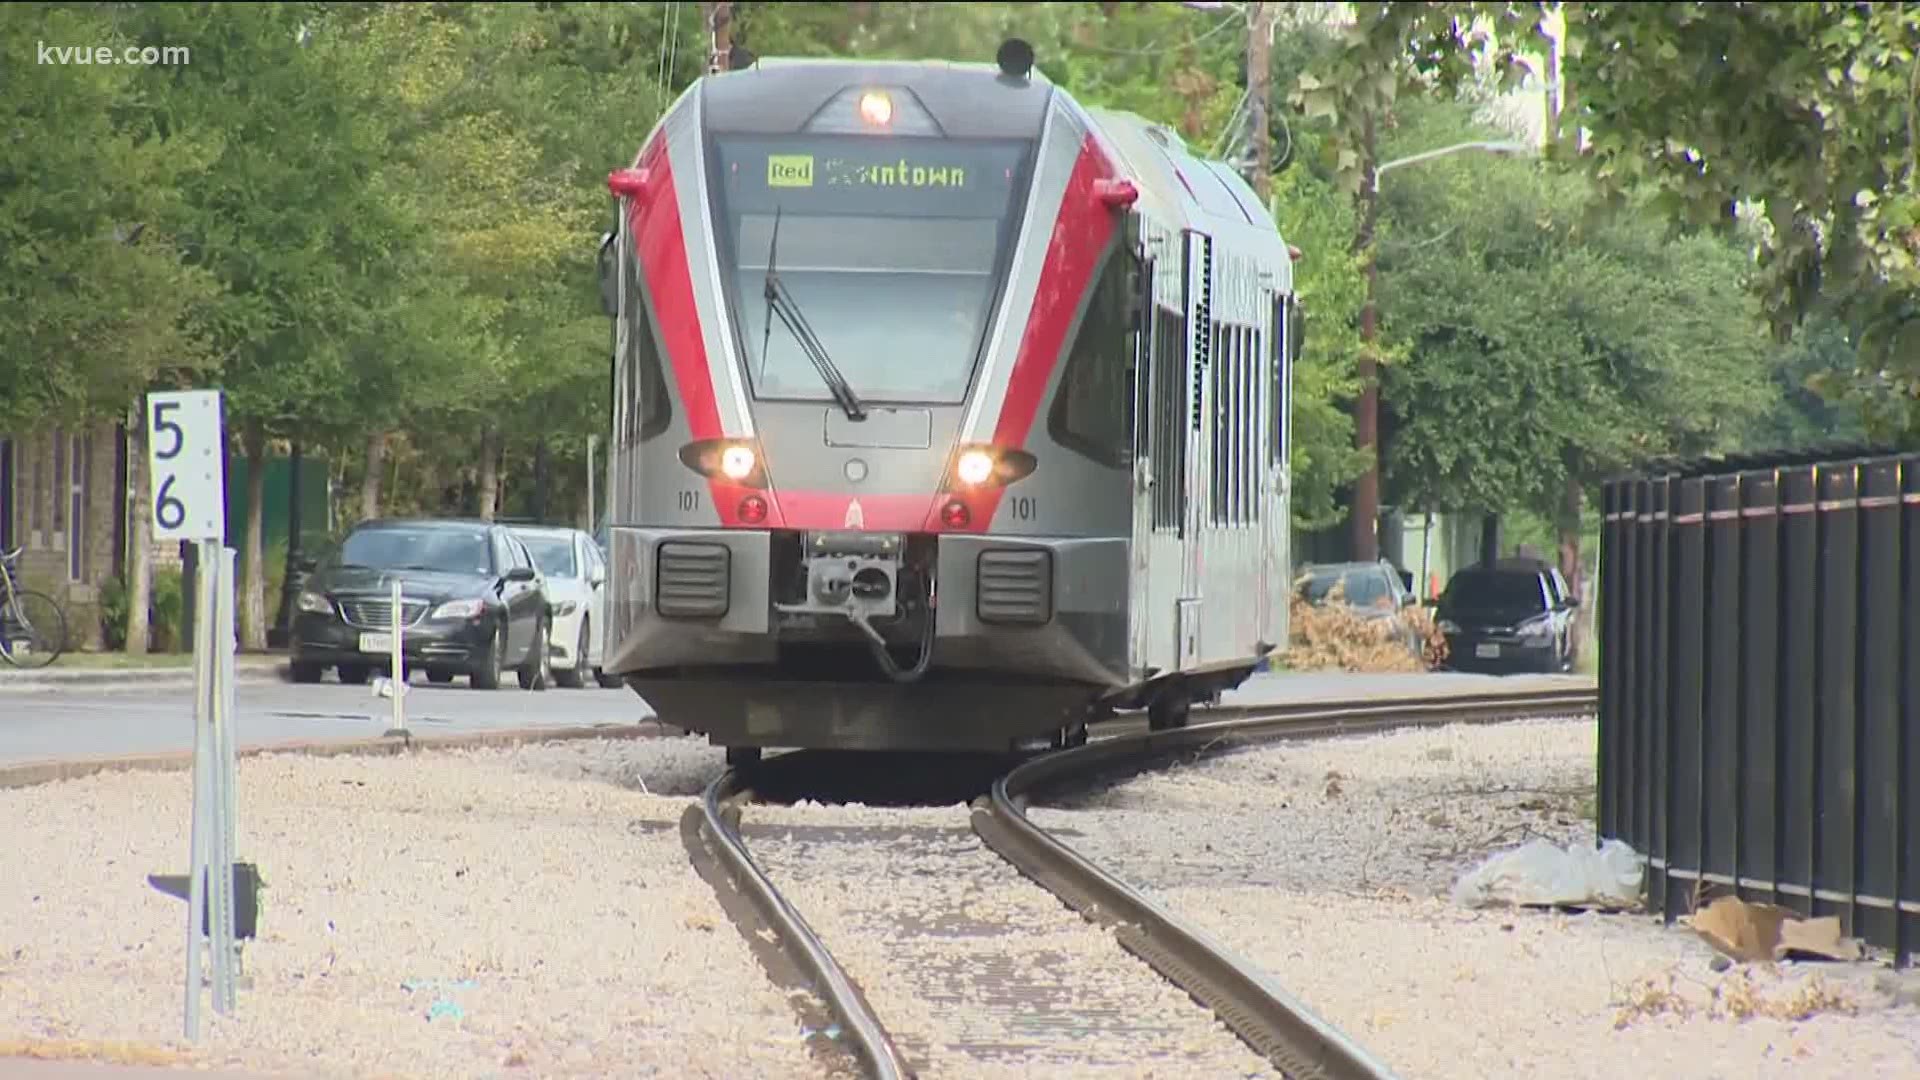 Austinites are learning how much it could cost taxpayers to overhaul mass transit in Austin. Bryce Newberry explains what you'd pay and what you'd get.